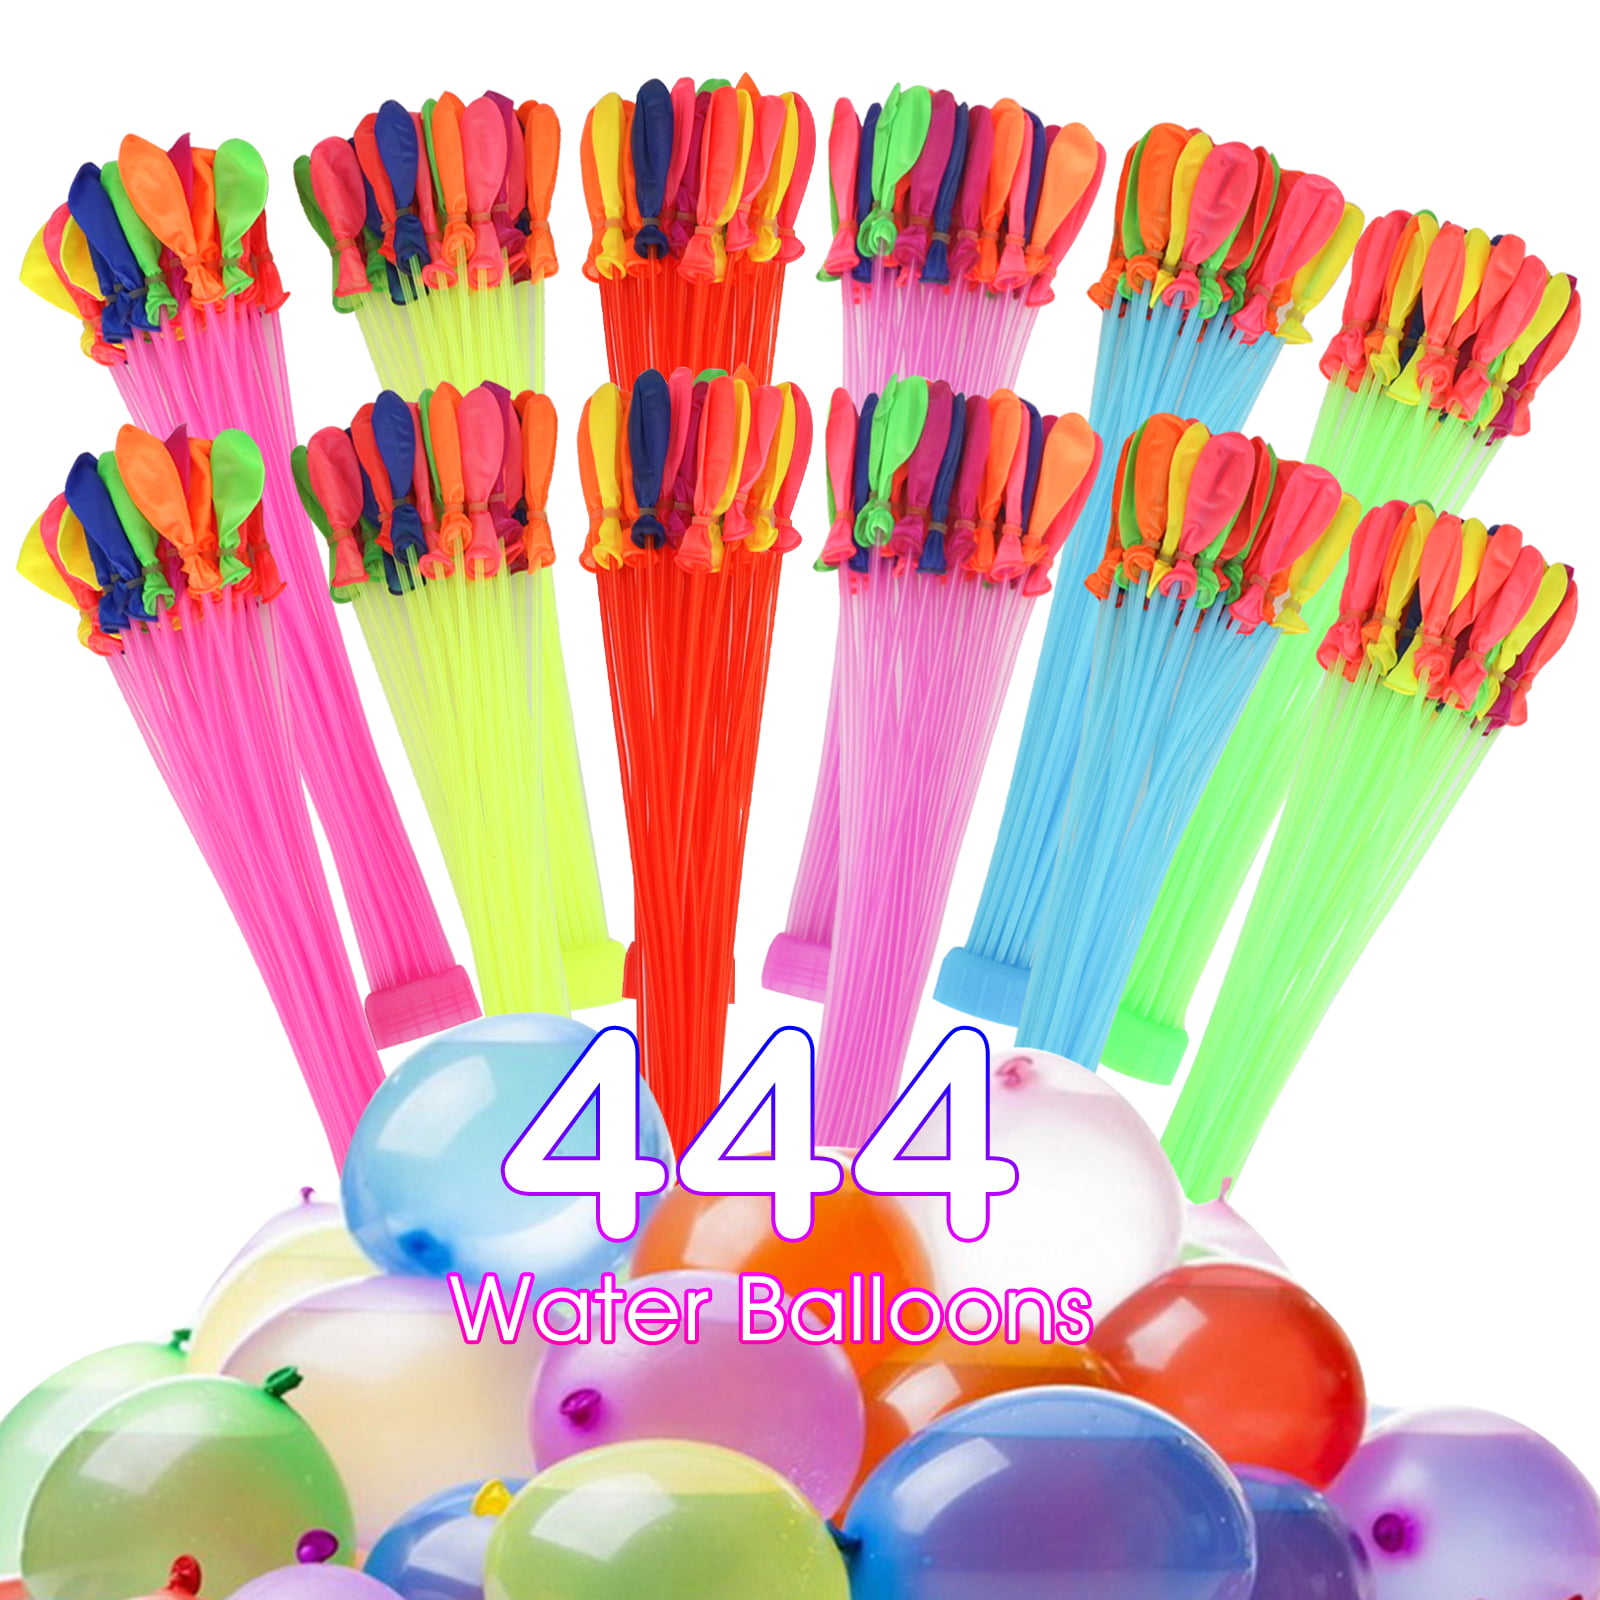 Latex Water Bomb Balloons for Kids and Adults Water Balloons Refill Kits 444 Pack Colorful Air Balloons 